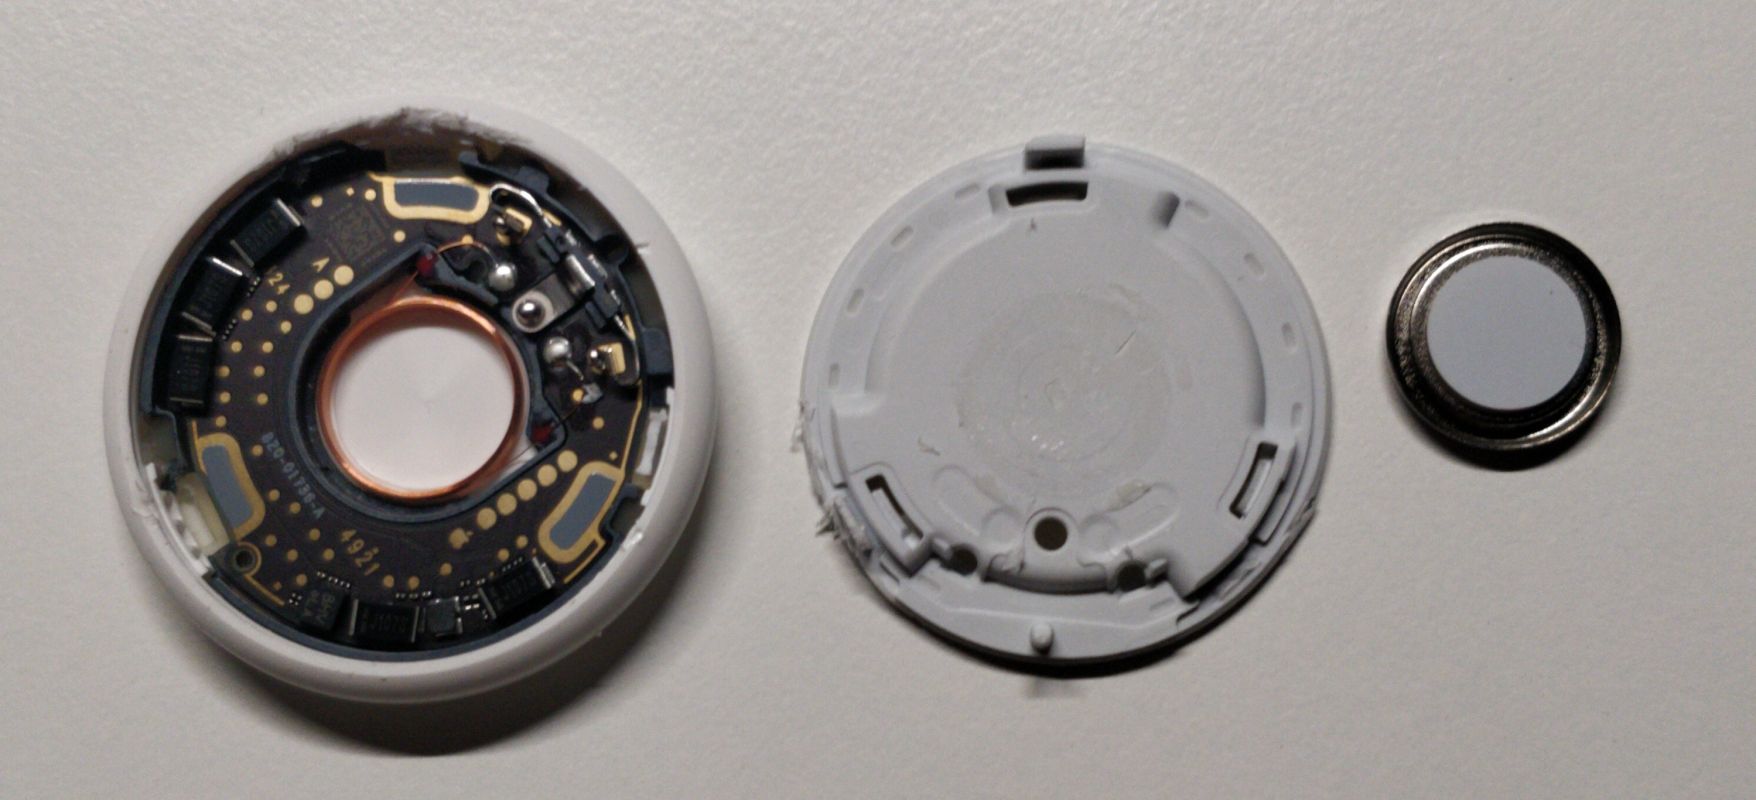 From left to right: AirTag board, midplate and speaker separated